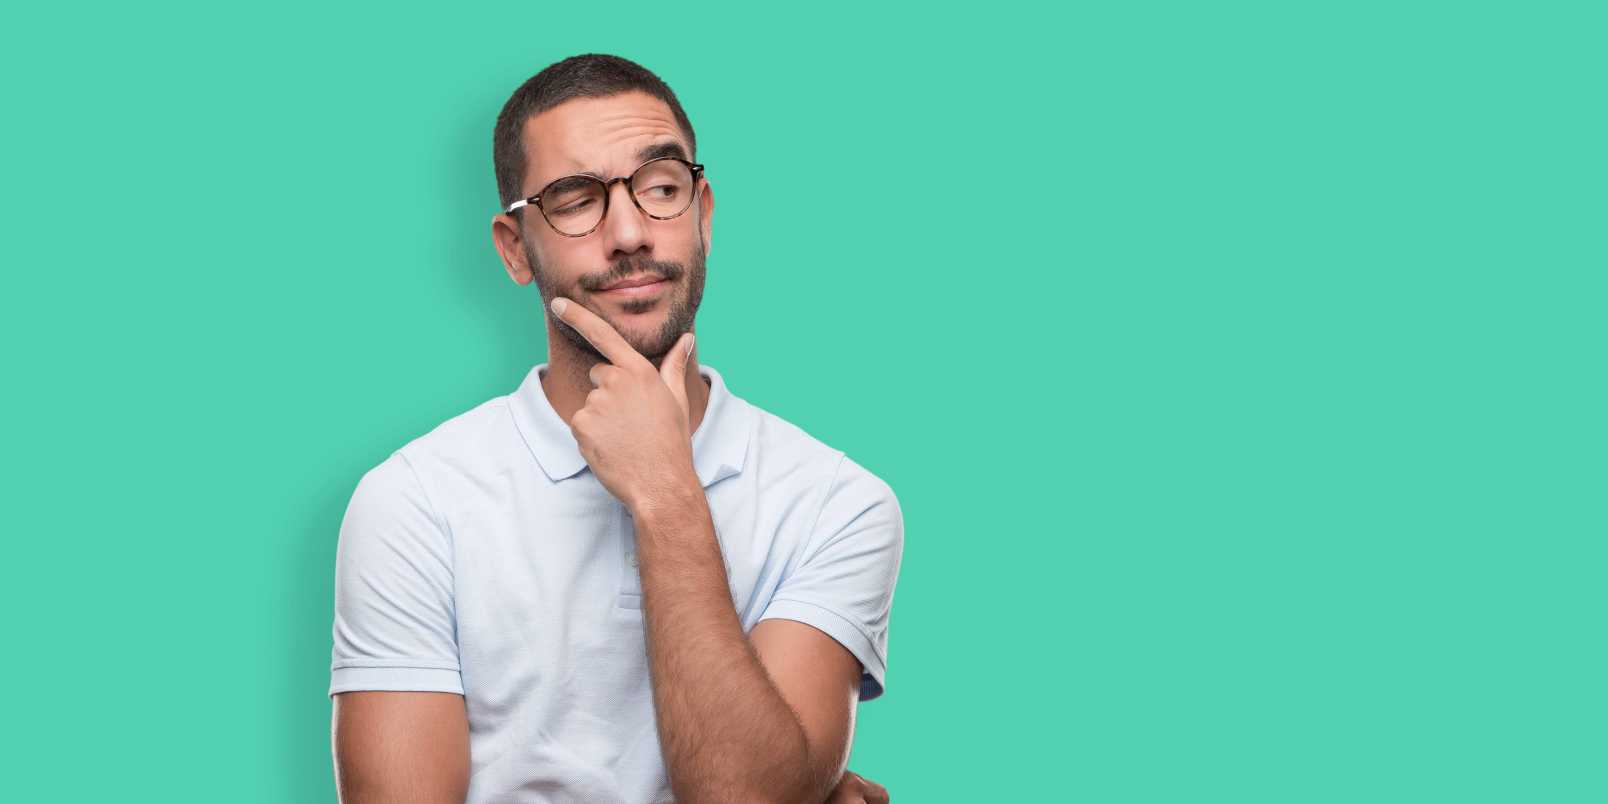 Man against a light teal background wearing glasses and stroking chin while wondering whether a vasectomy lowers testosterone